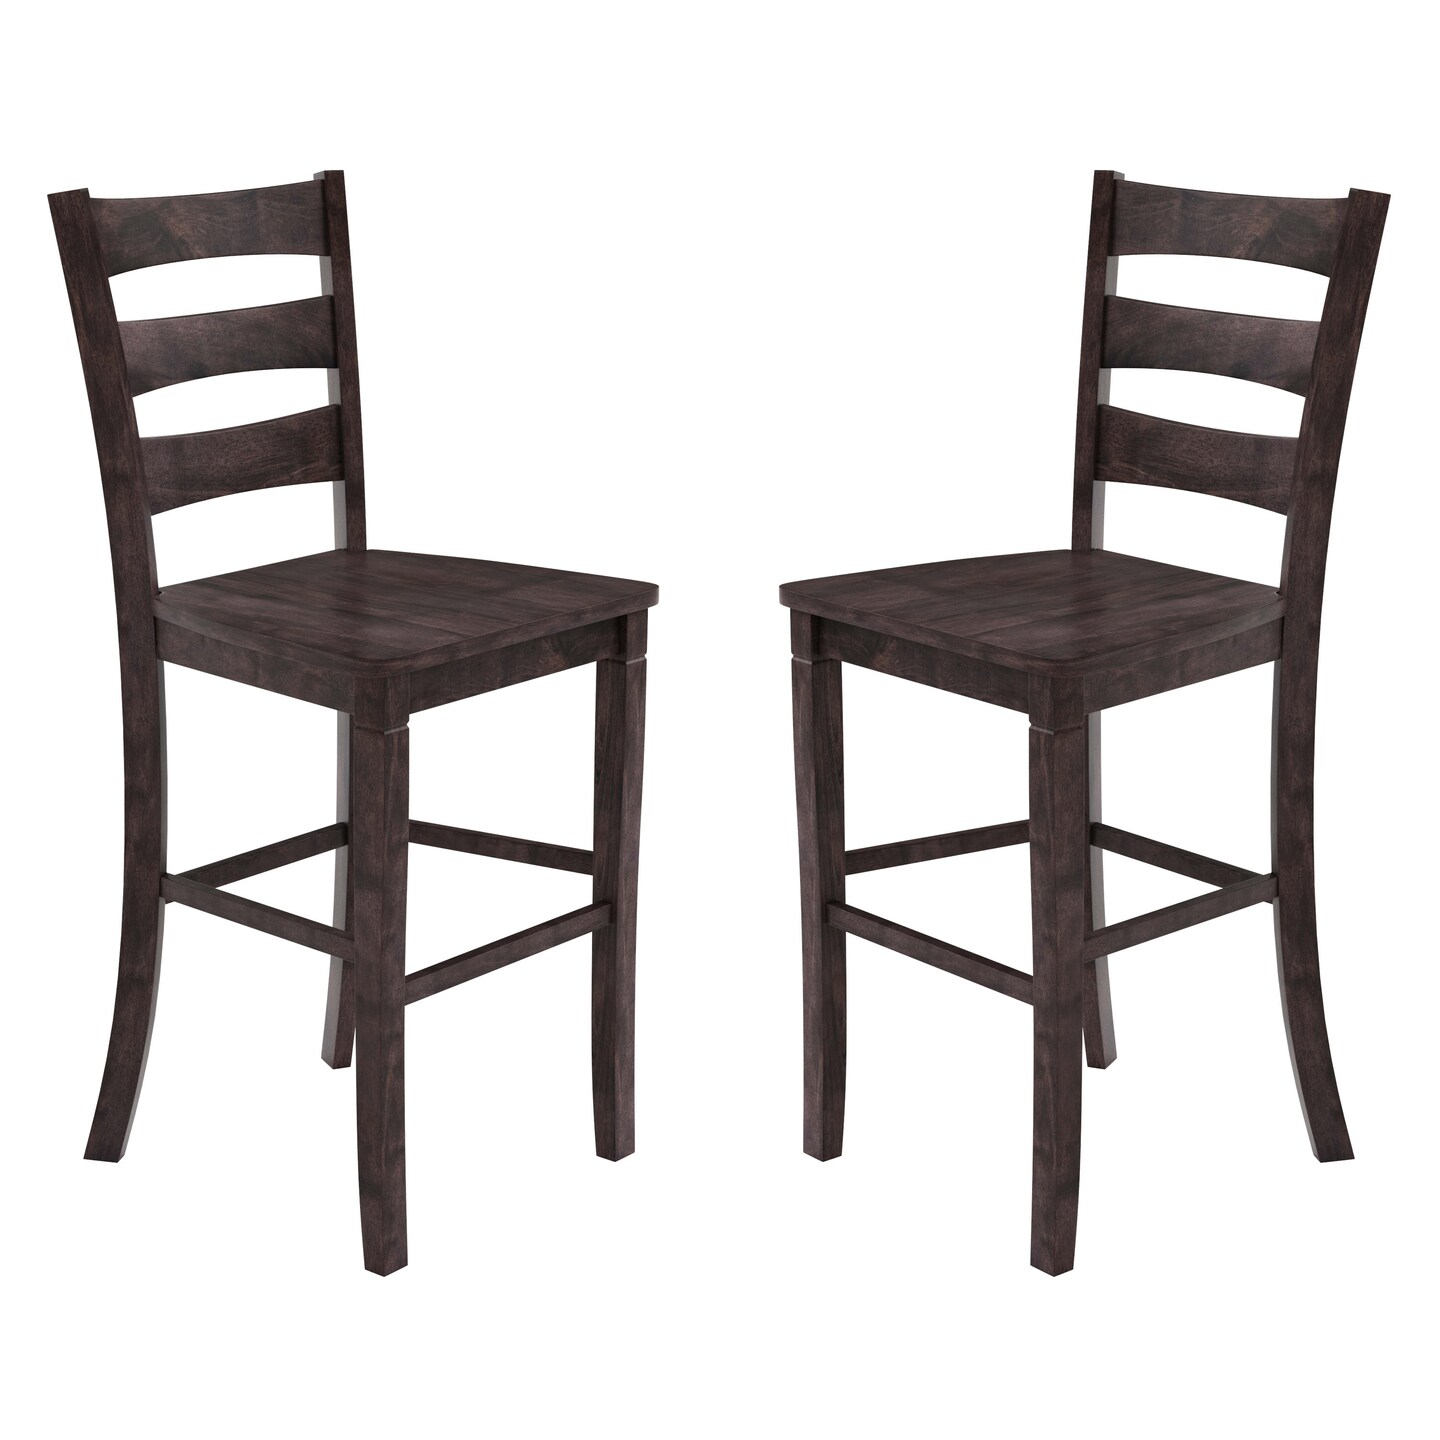 Merrick Lane Verity Set of Two Classic Wooden Ladderback Counter Height Barstools with Solid Wood Seats